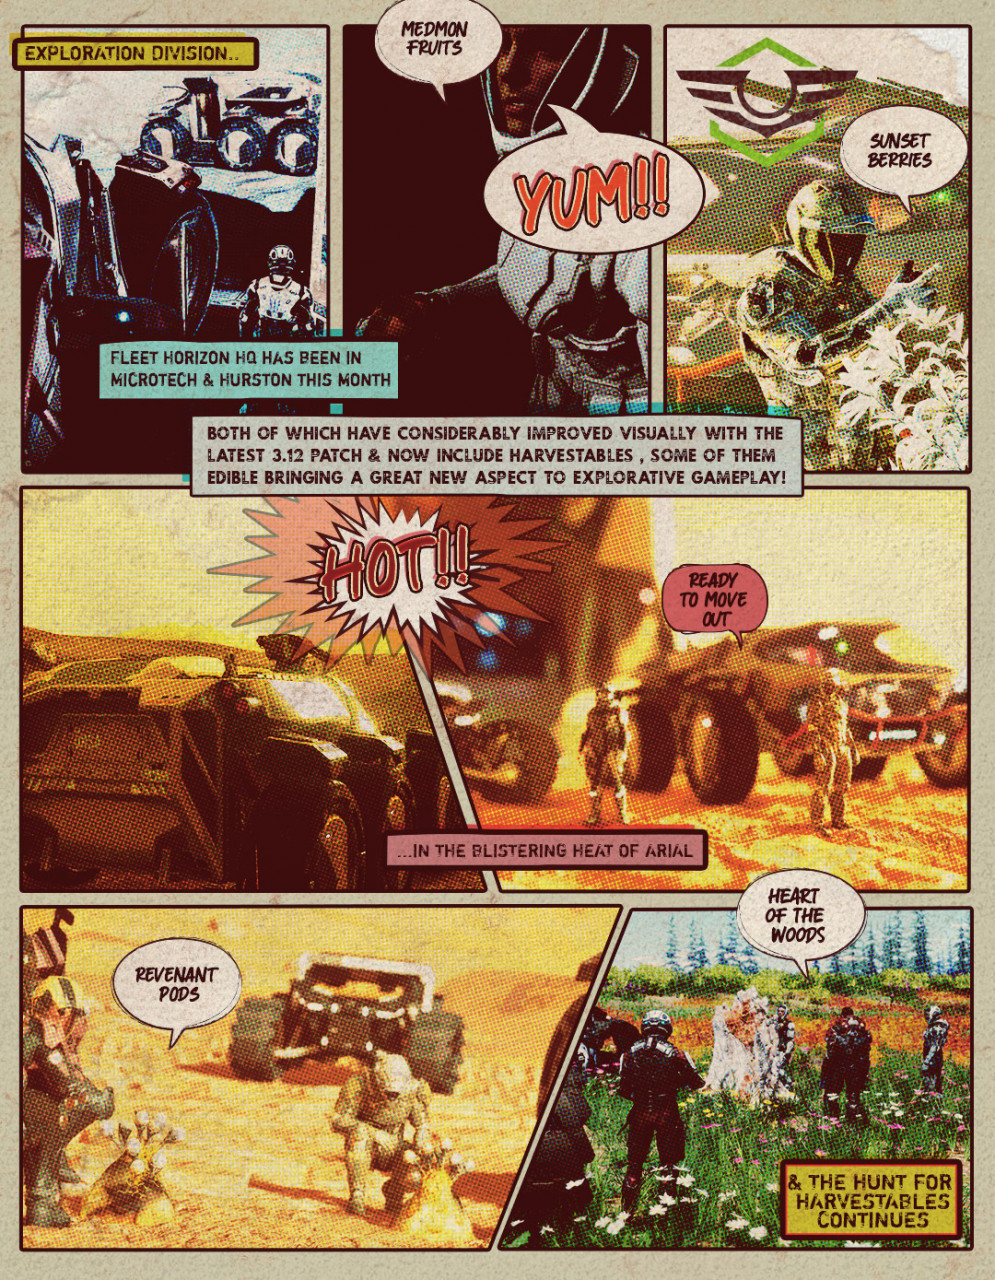 On The Ophelia Vine - Monthly News Strip from DSC - 1st IssueOn The Ophelia Vine - MonOn The Ophelia Vine - Monthly News Strip from DSC - 1st IssueOn The Ophelia Vine - Monthly News Strip from DSC - 1st Issuethly News Strip from DSC - 1st Issue -Exploration